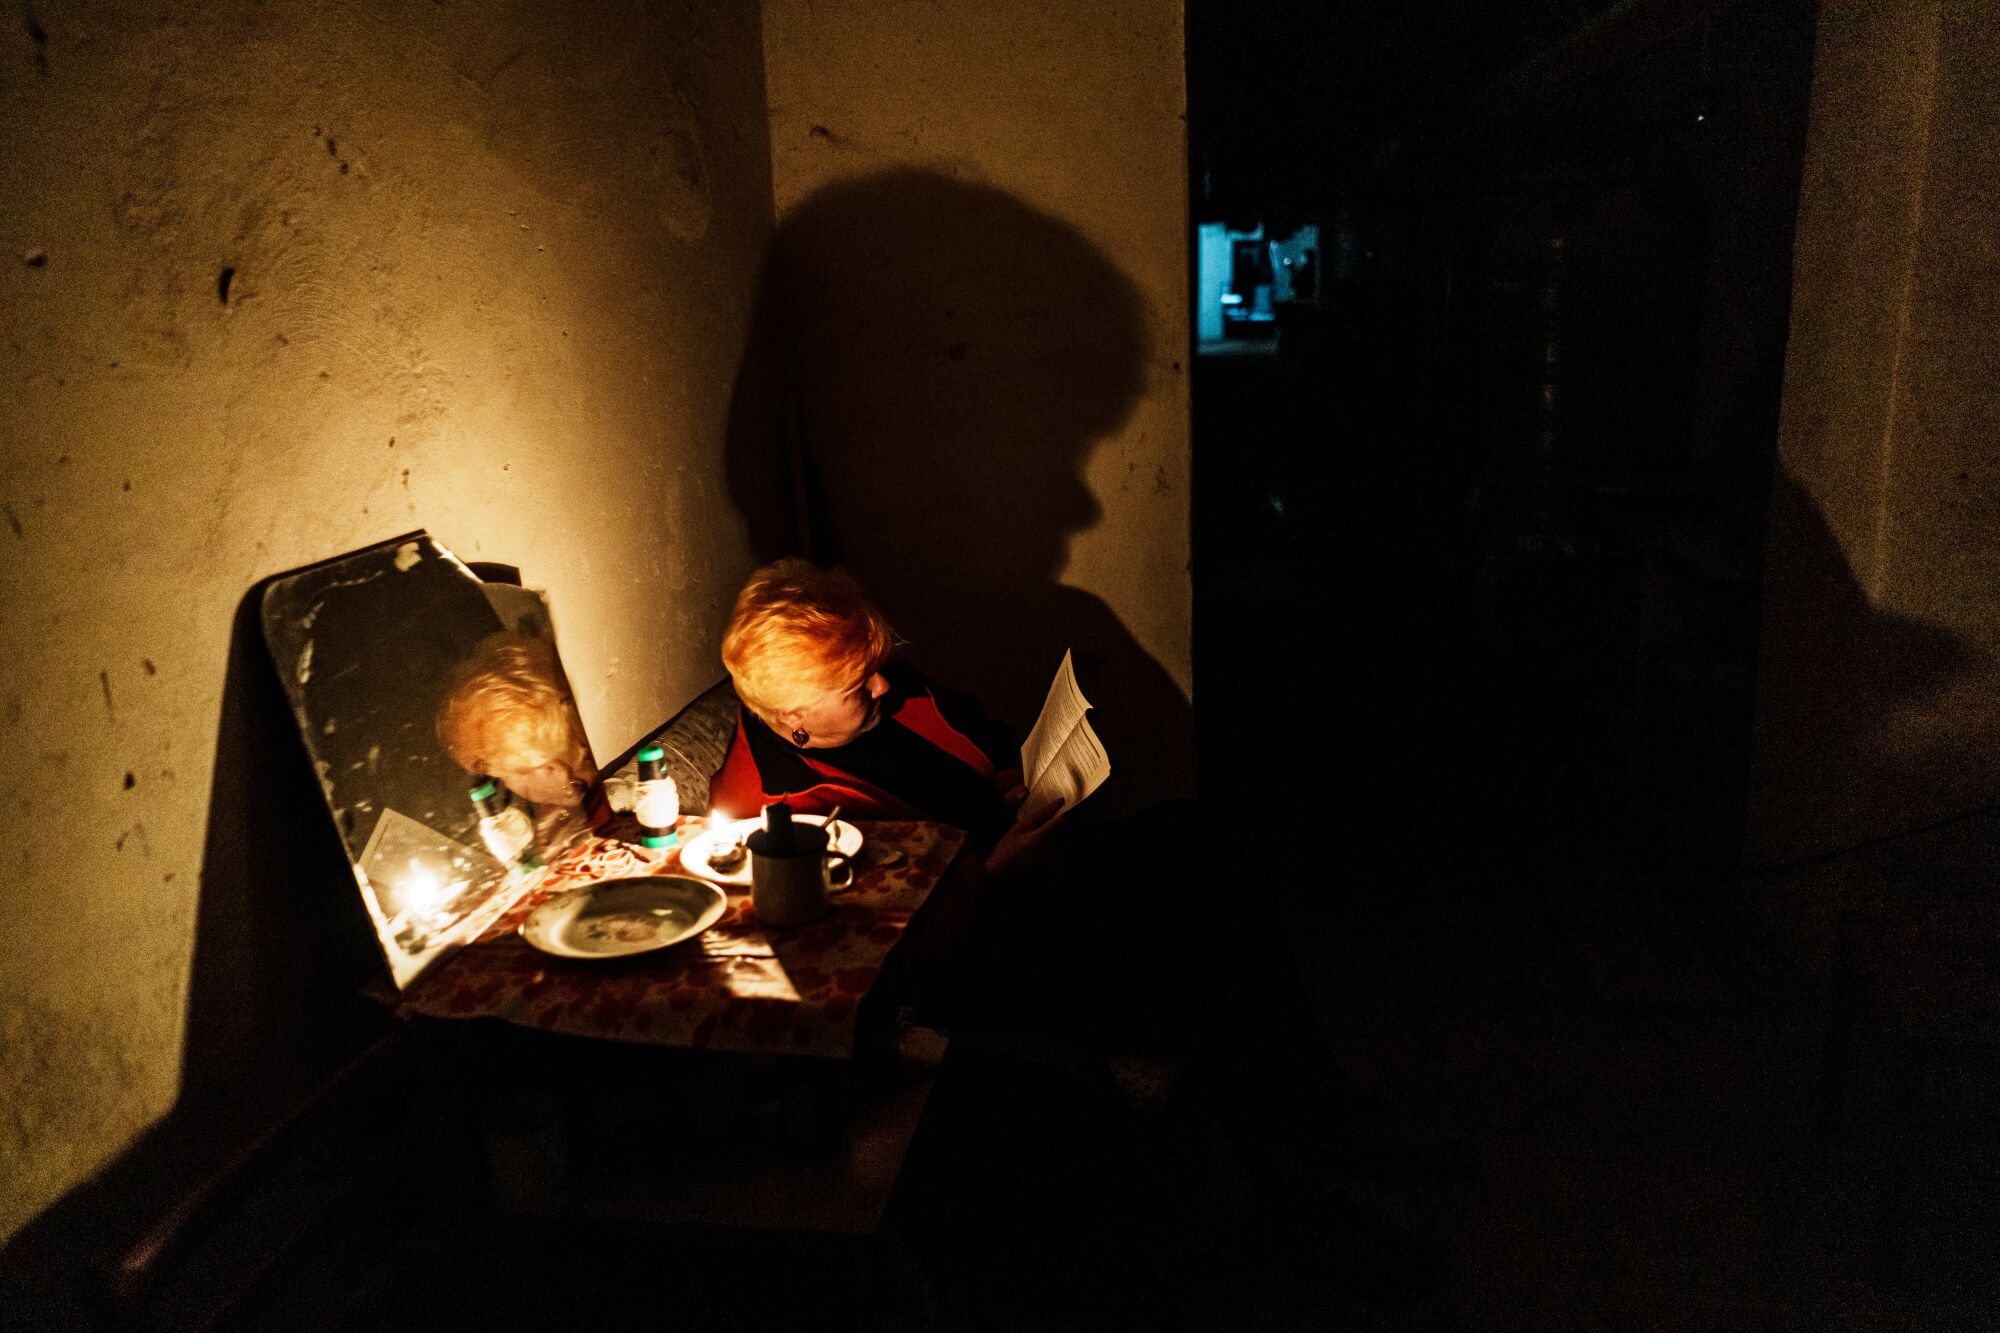  A woman reads a book underground in a mostly dark room